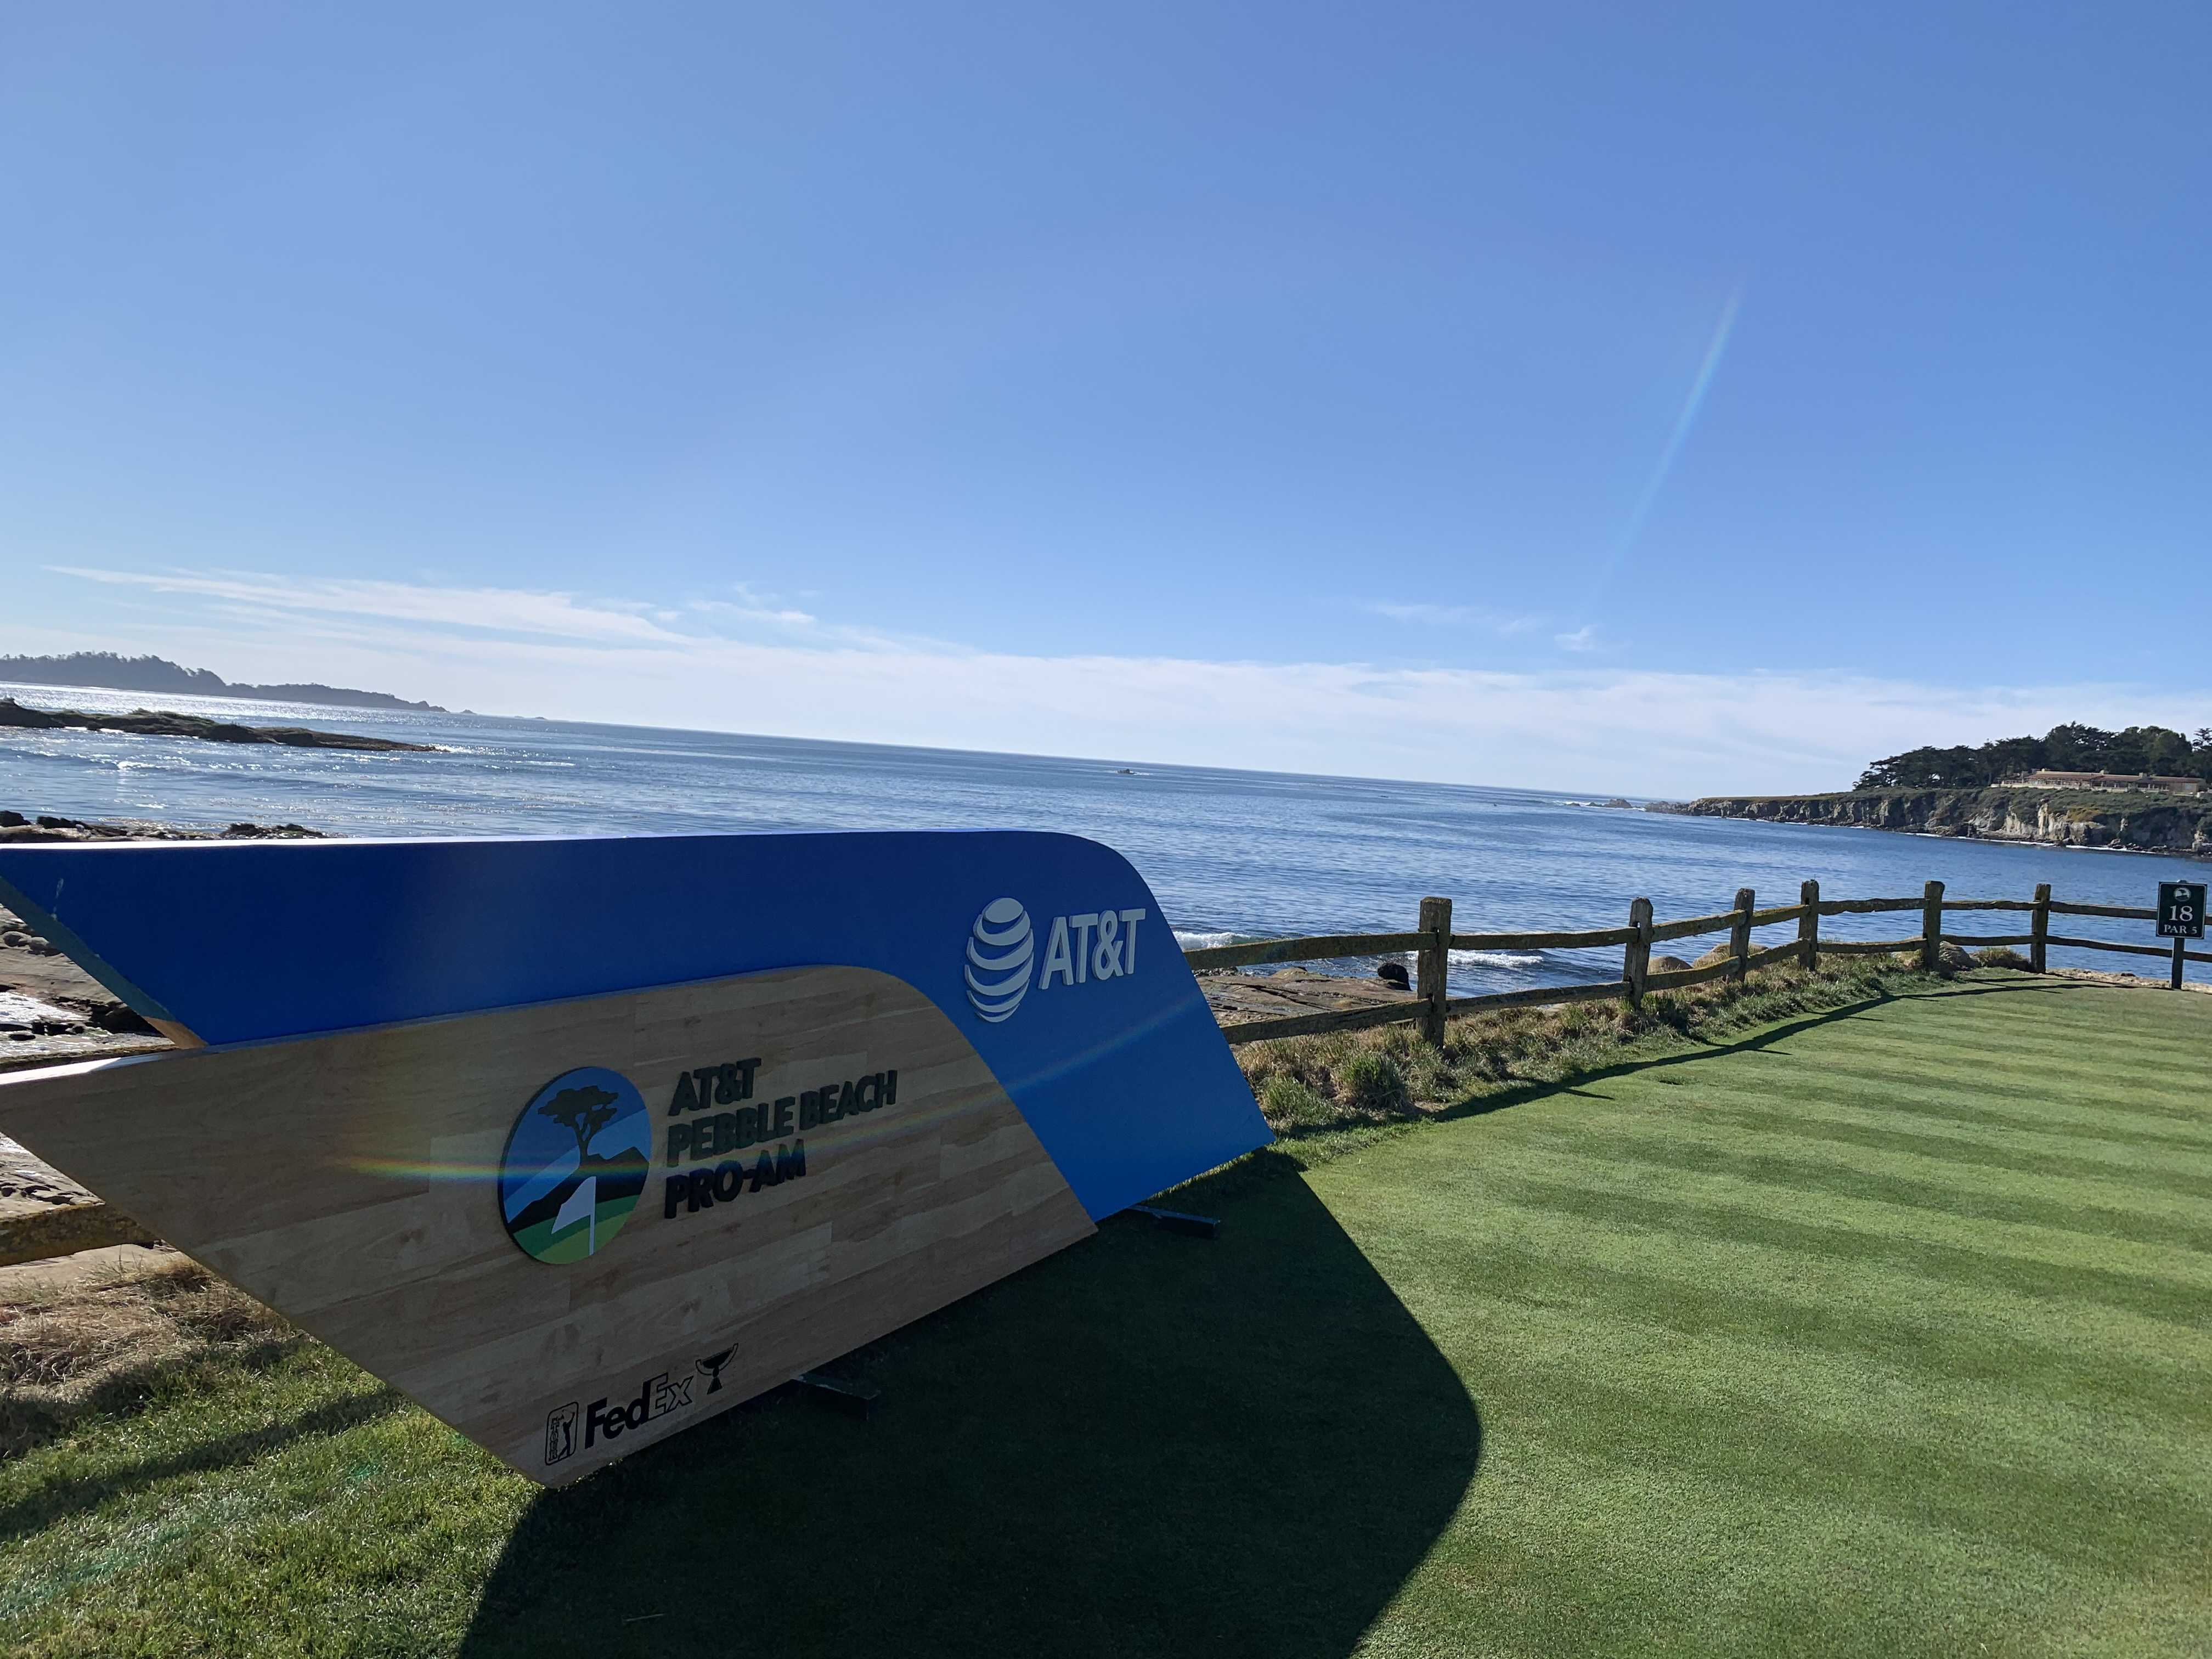 Pebble Beach Pro-Am sees record ticket sales